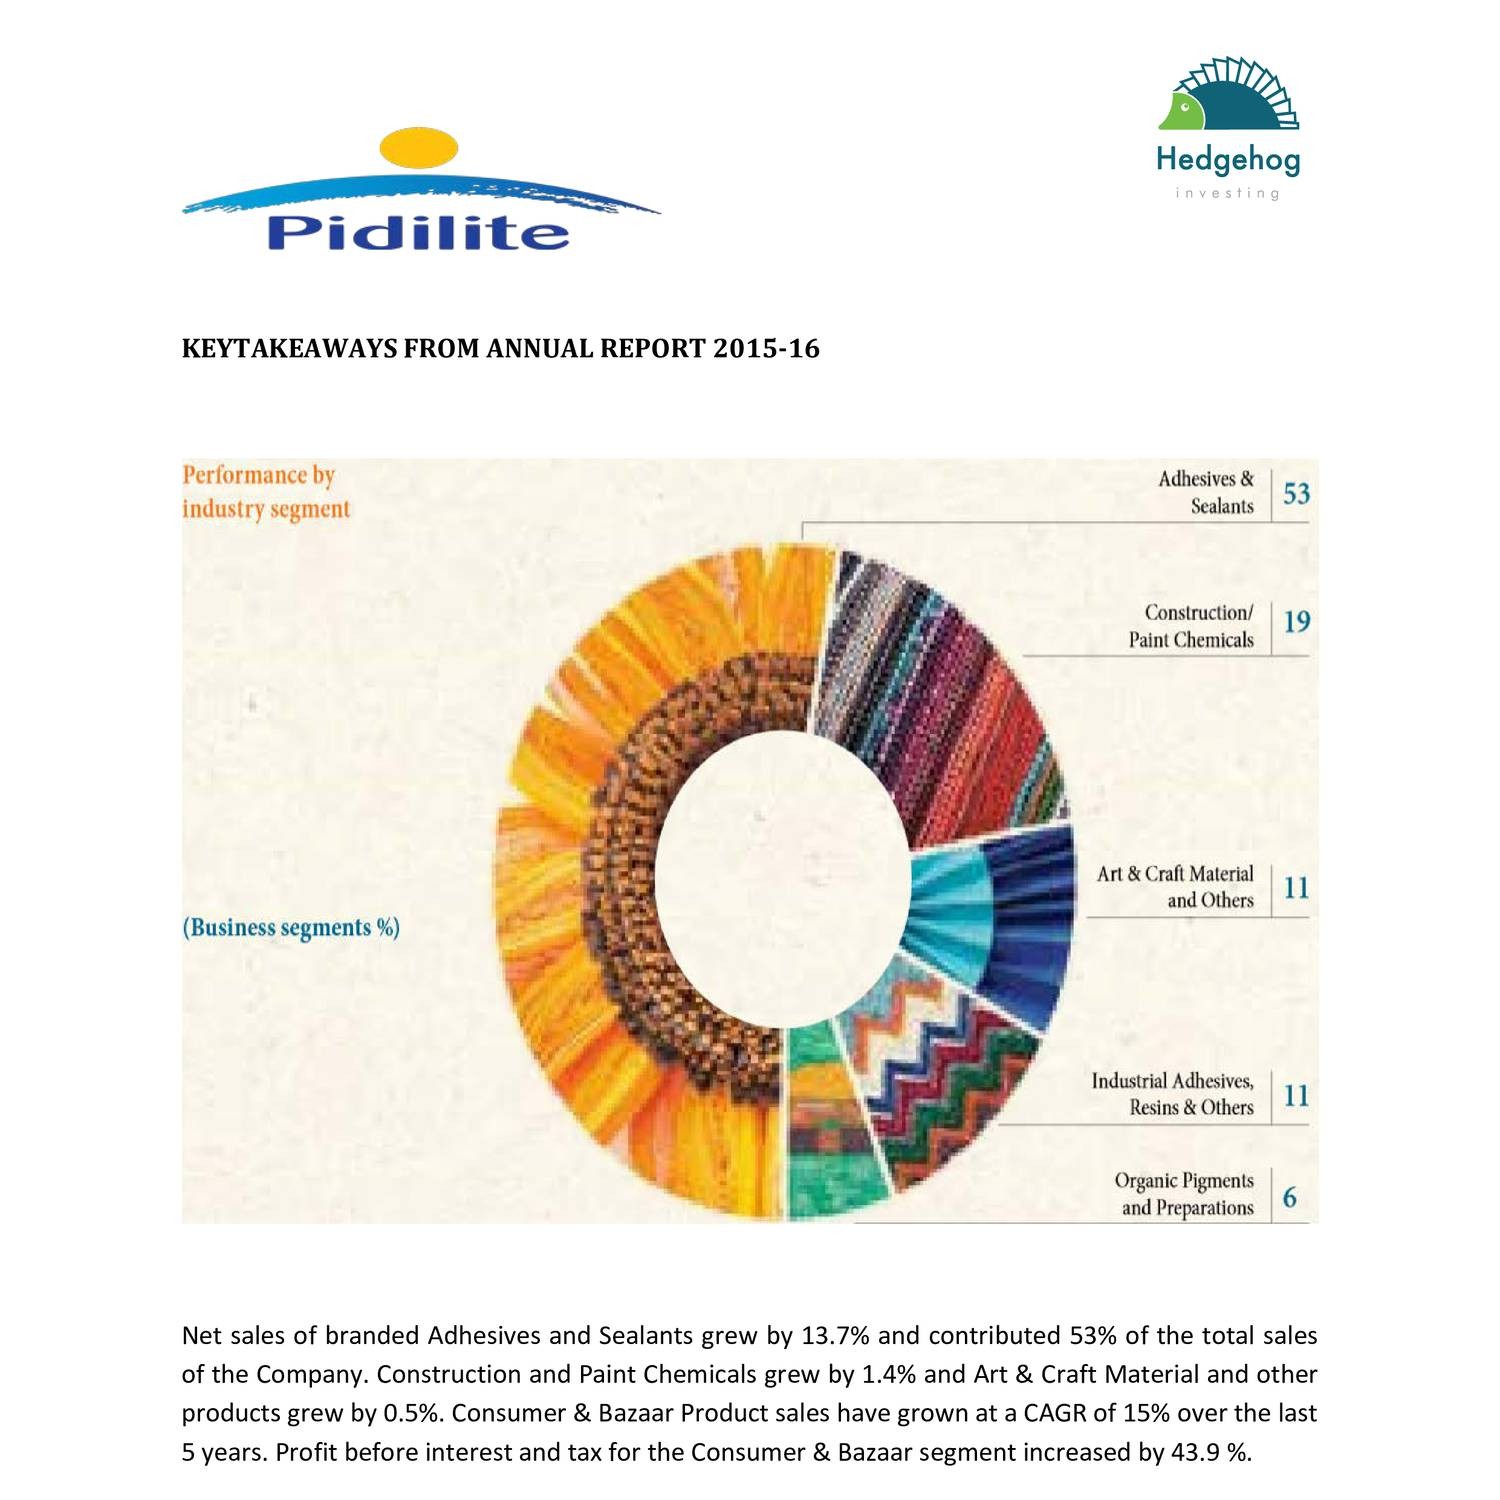 research report on pidilite industries